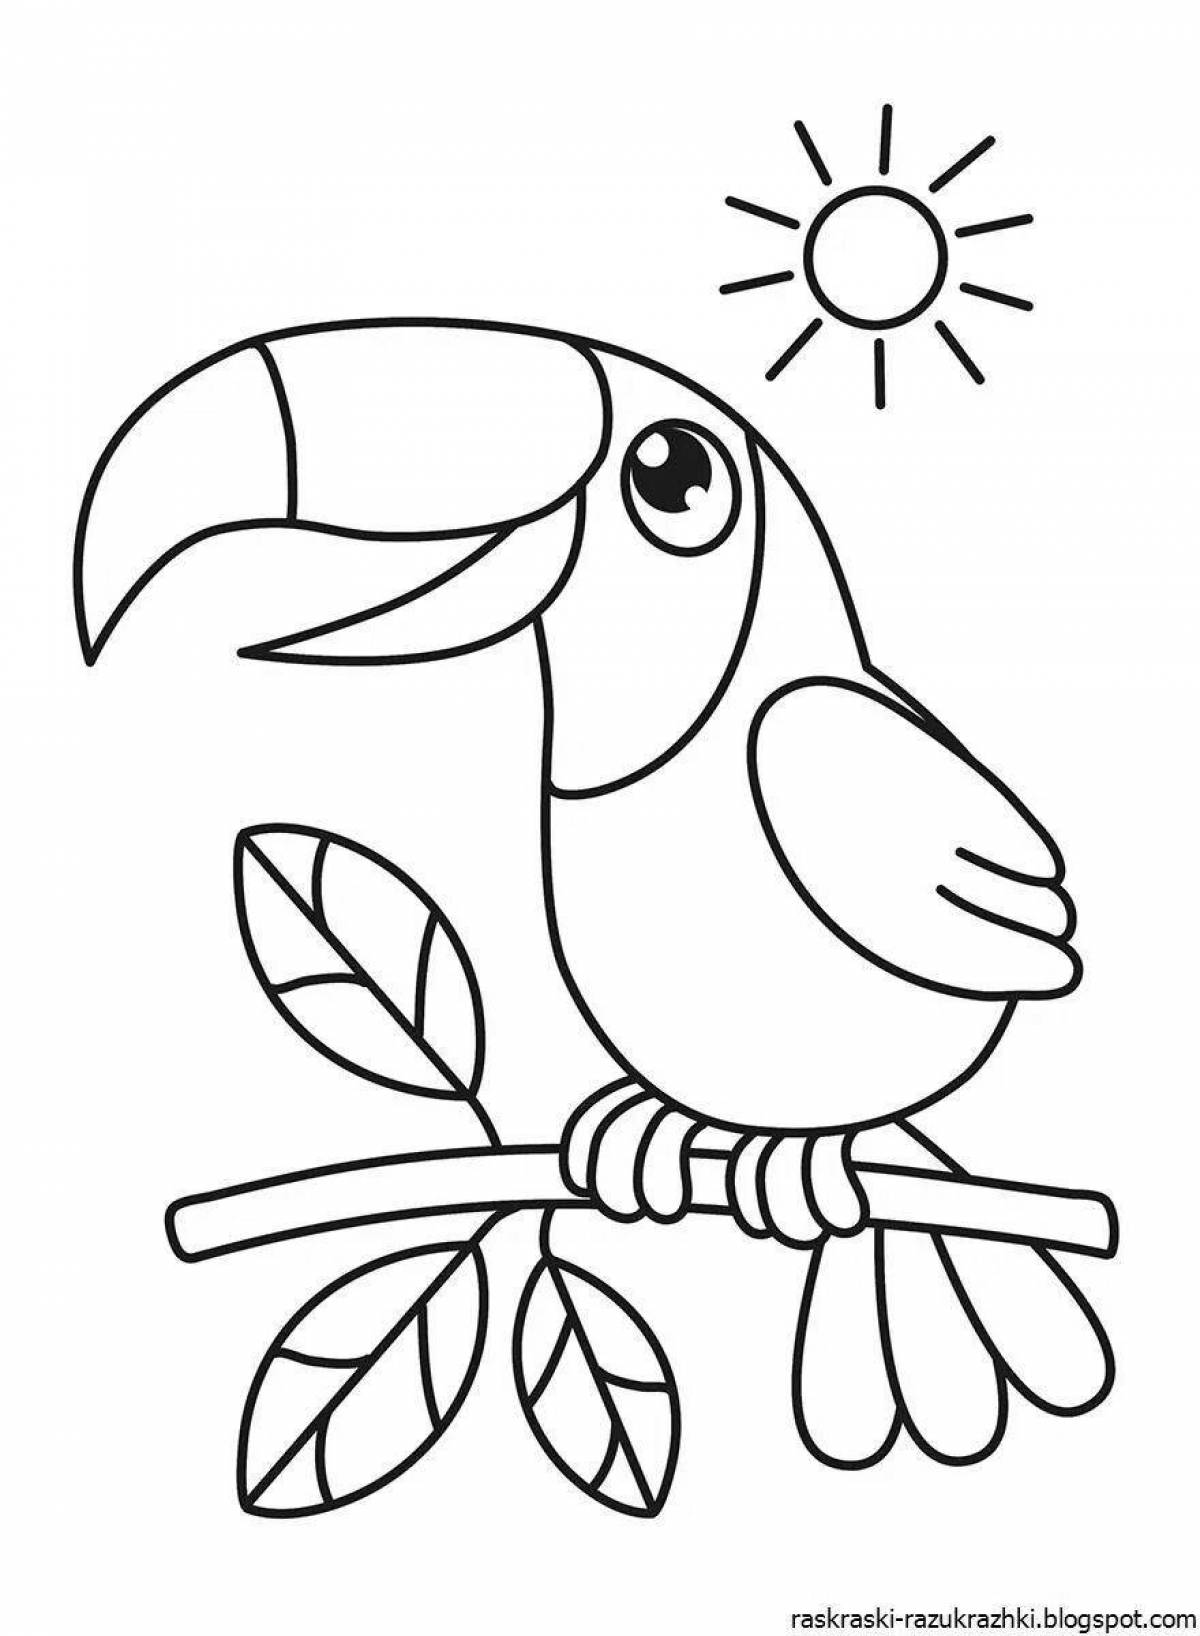 Coloring bird for kids 2-3 years old